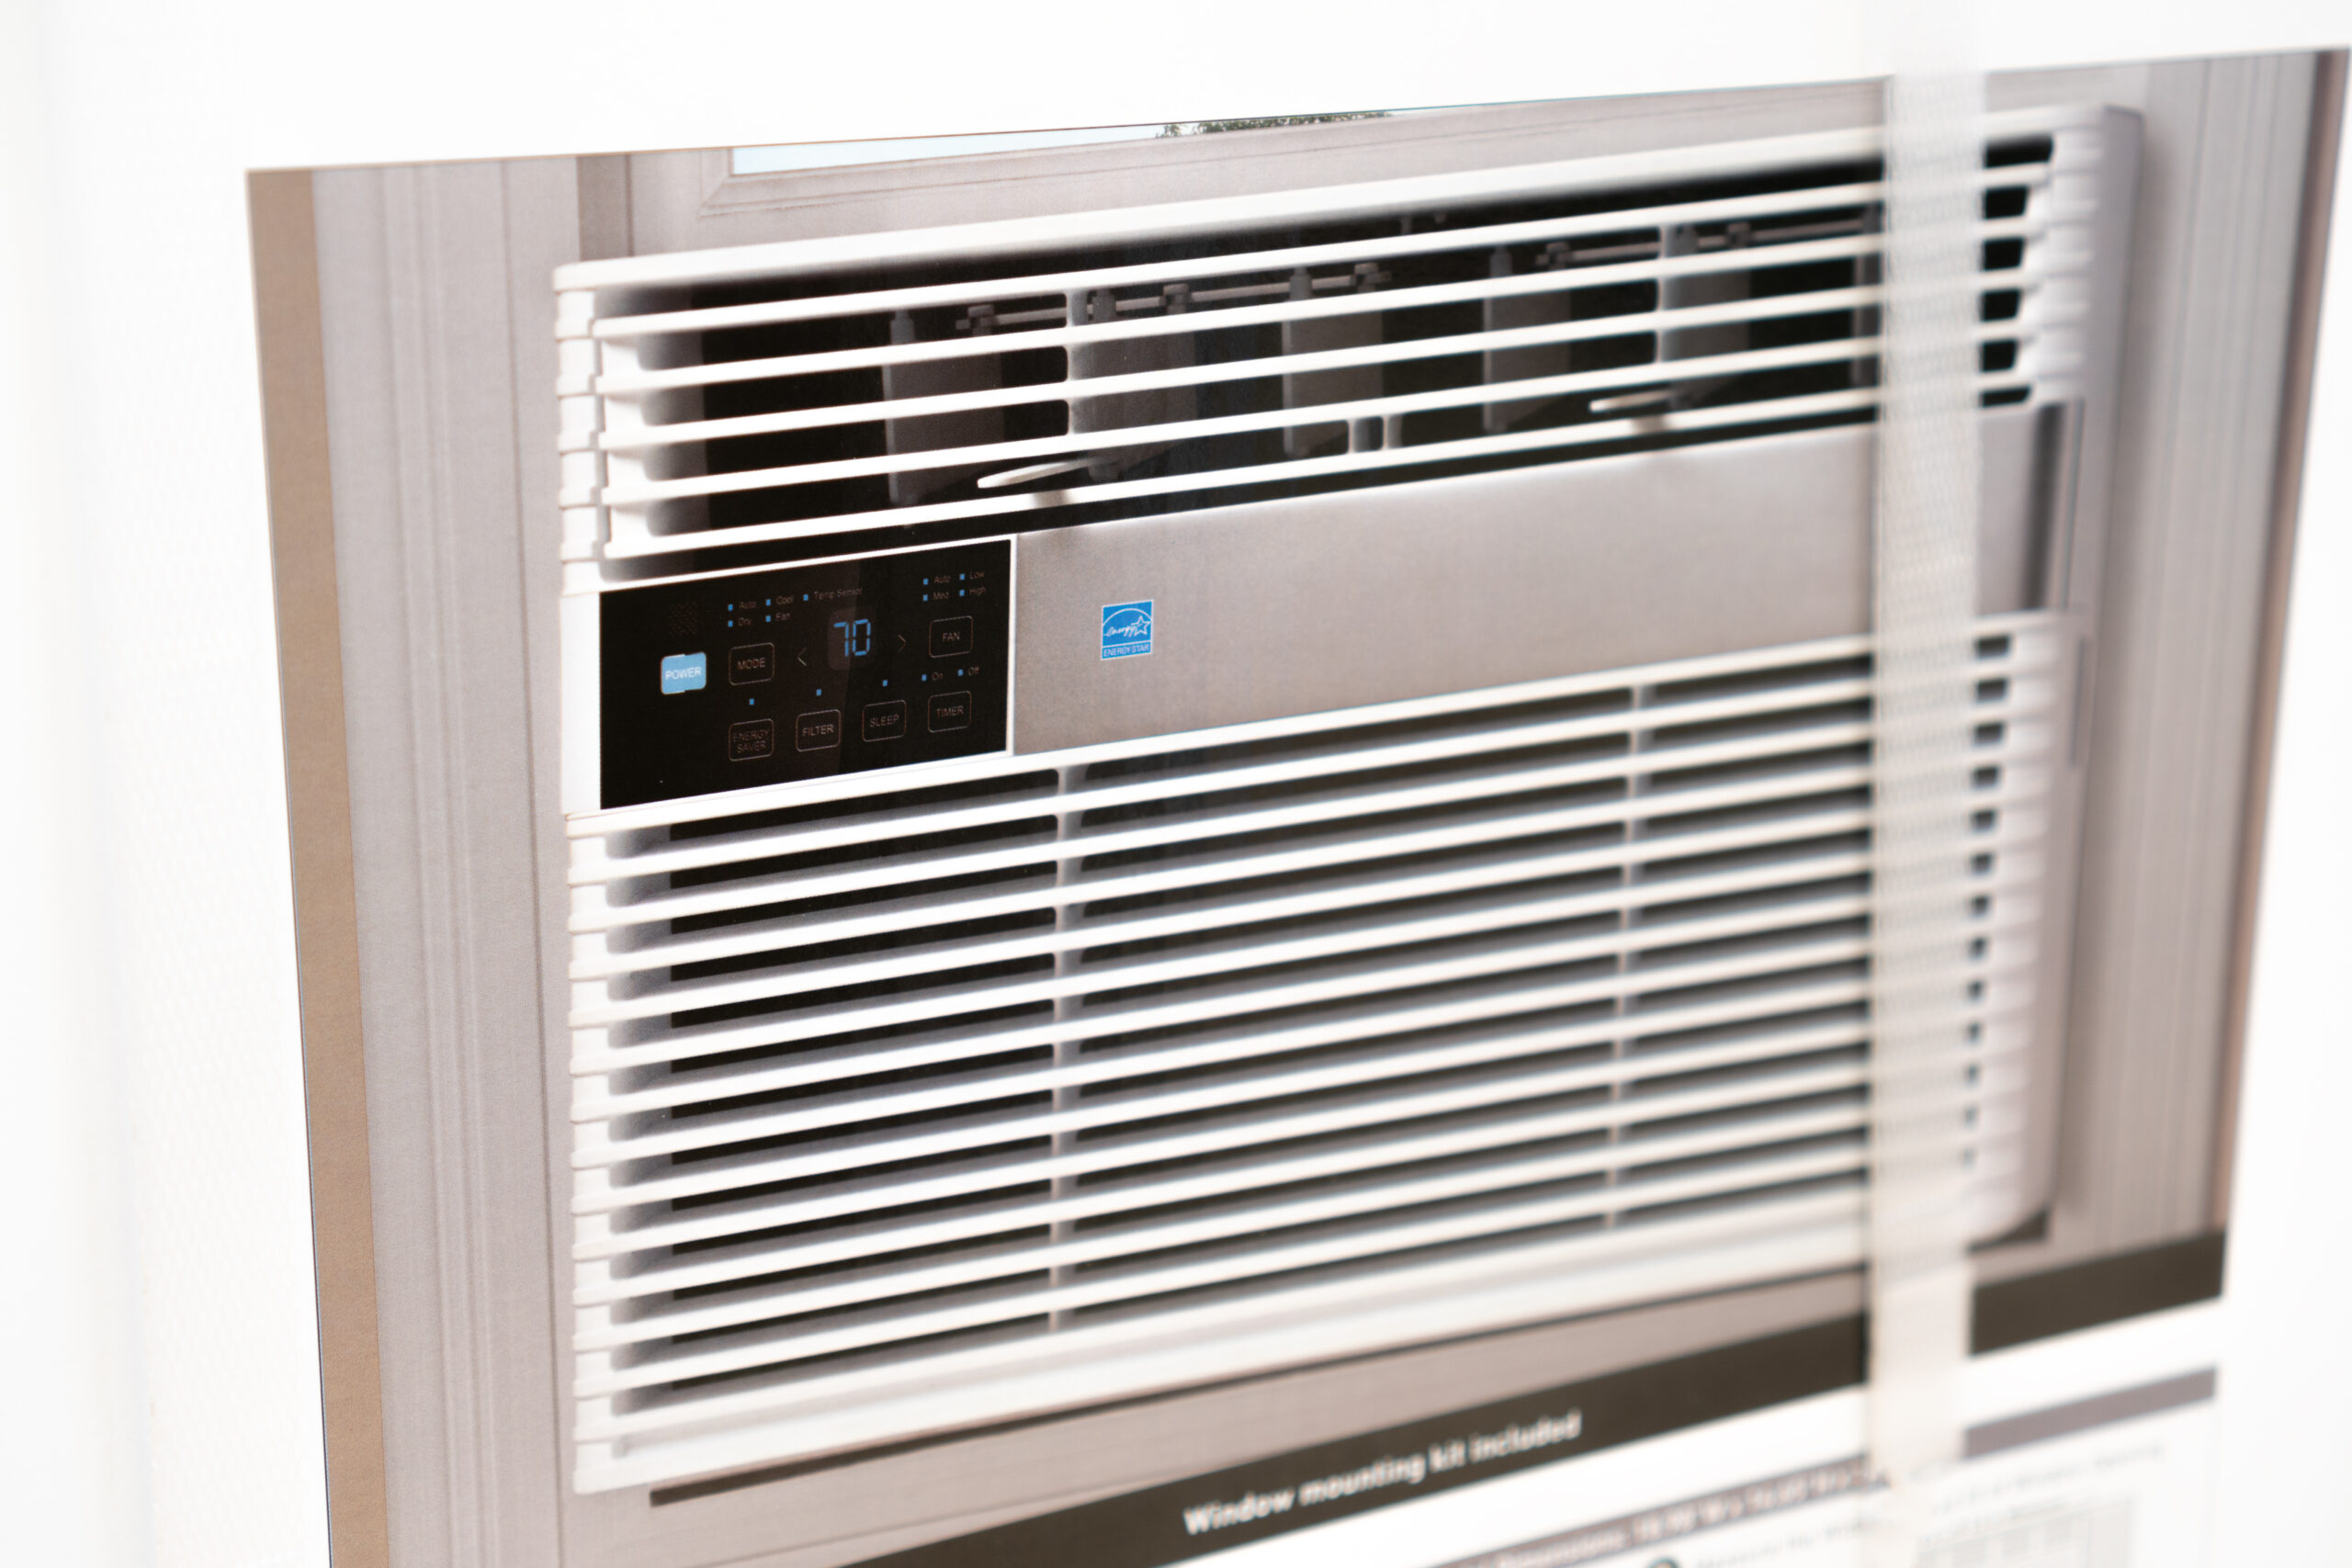 An Energy Star brand air conditioner